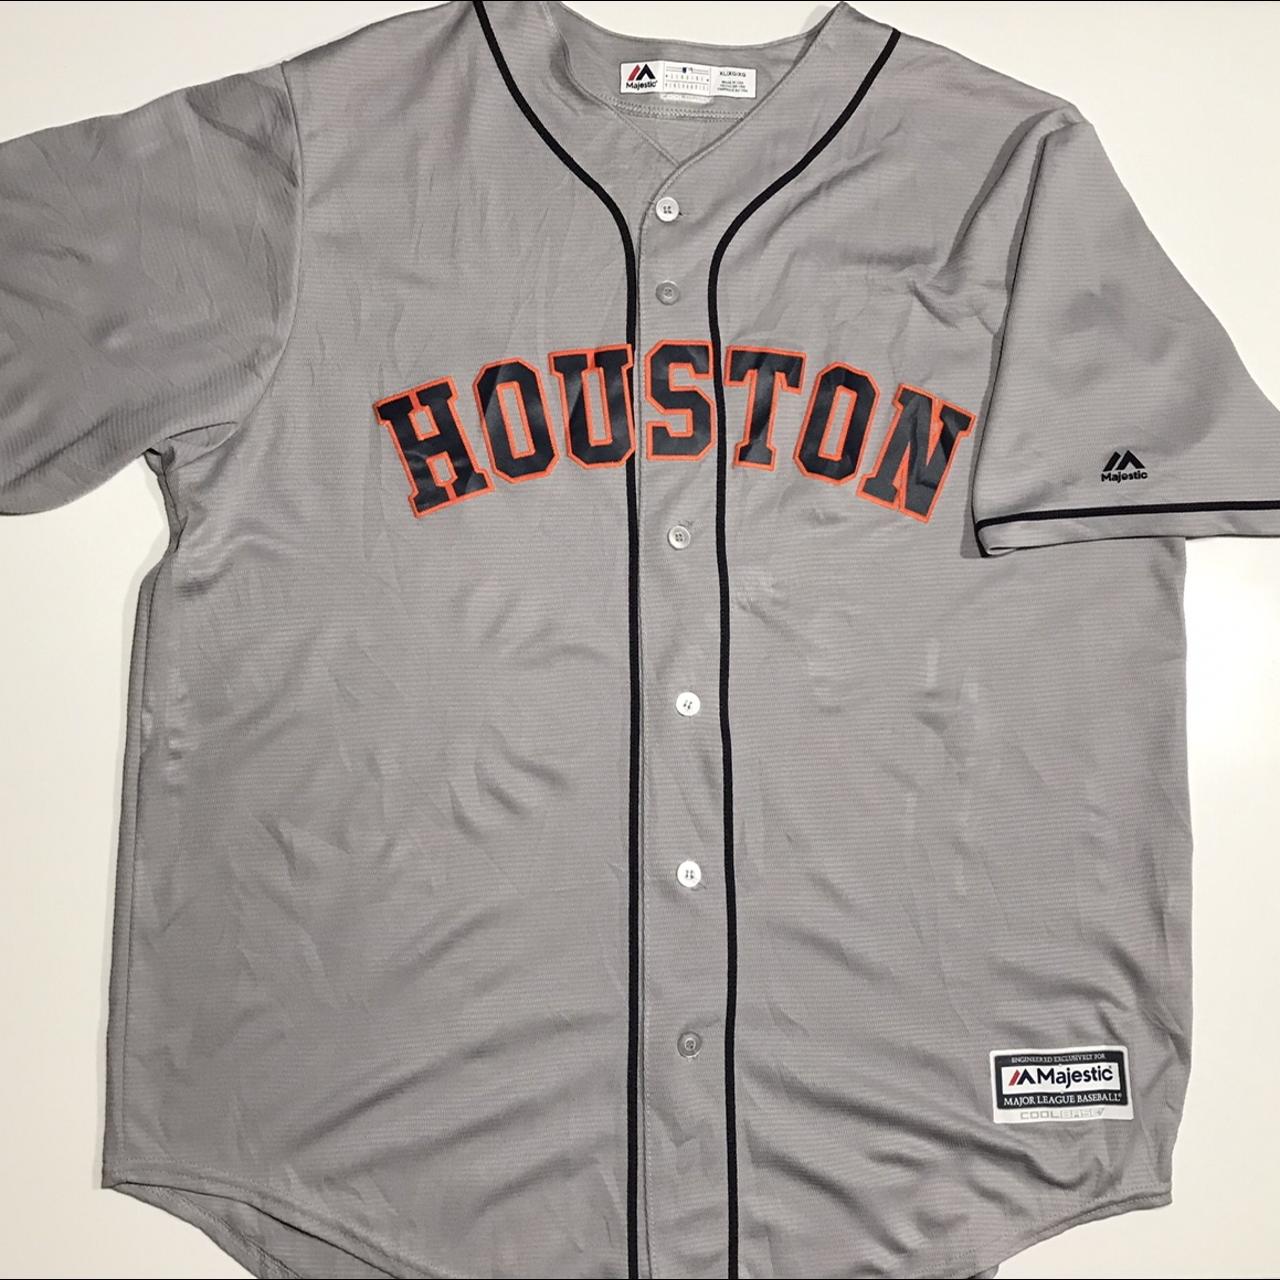 Men's Majestic Gray Houston Astros Official Cool Base Jersey